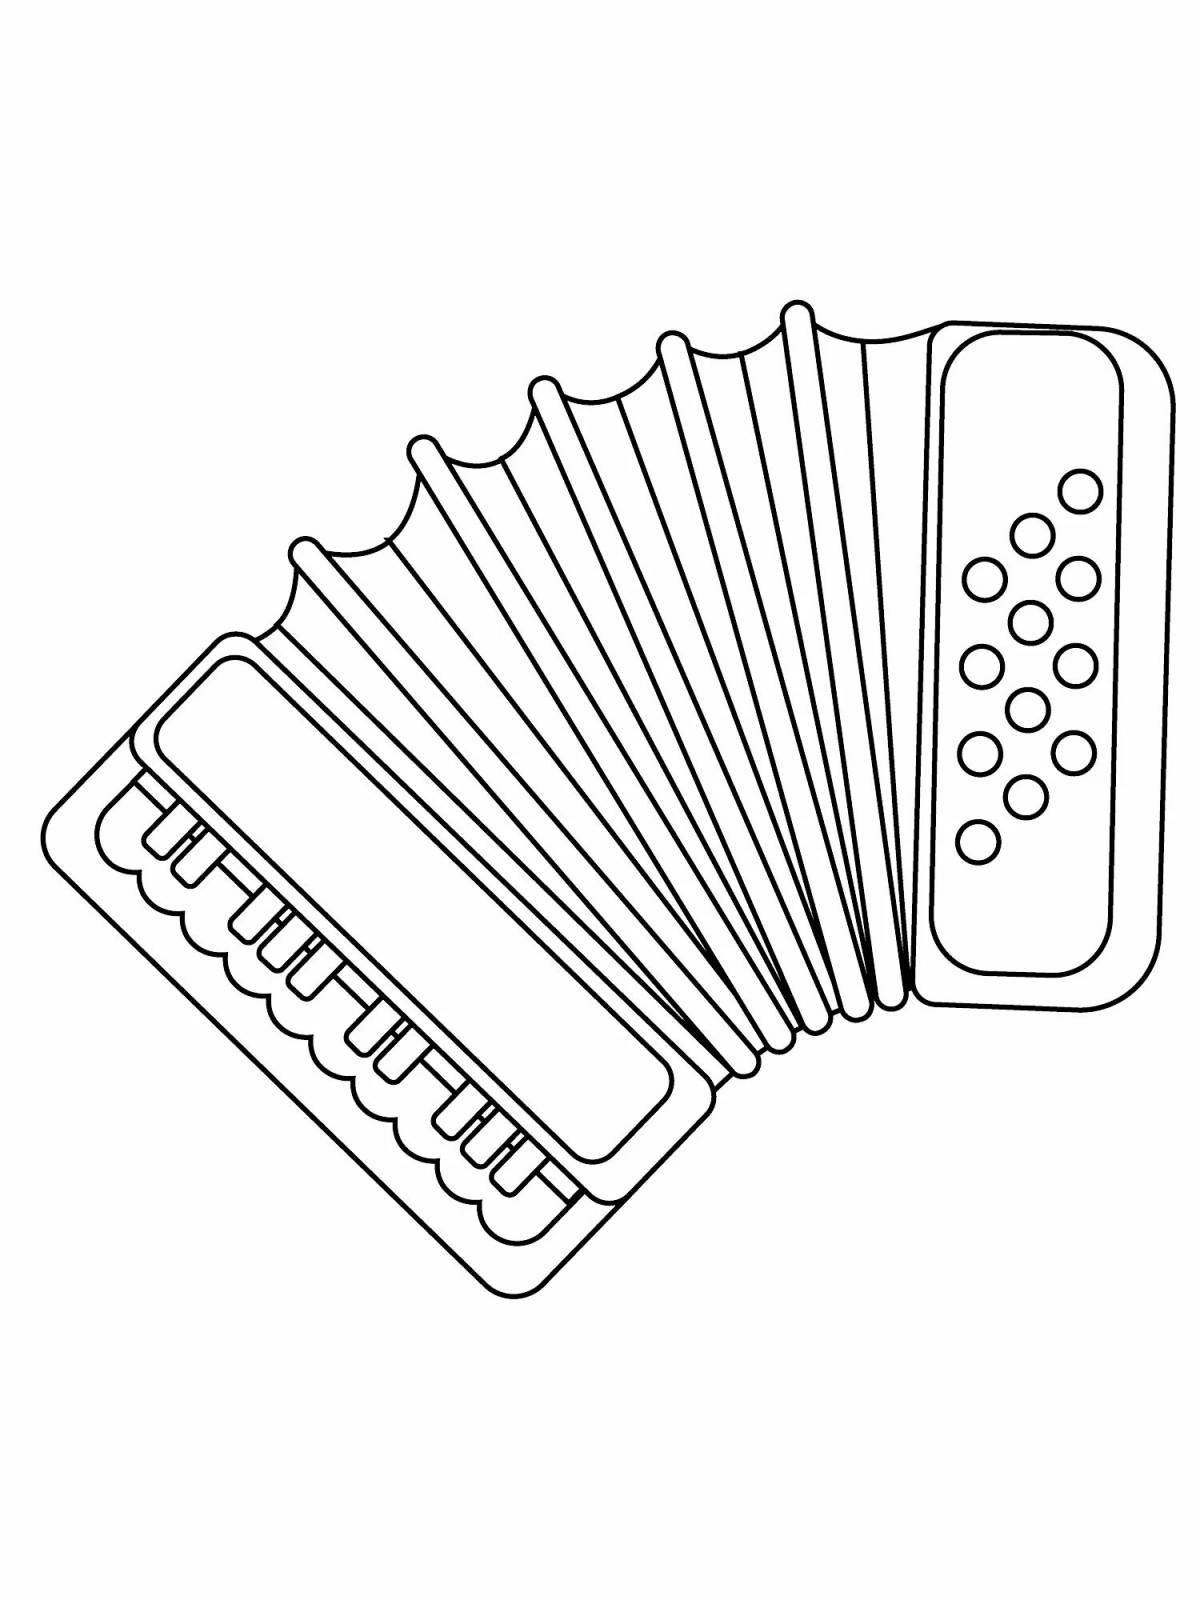 Beautiful musical instruments for button accordion for students with names